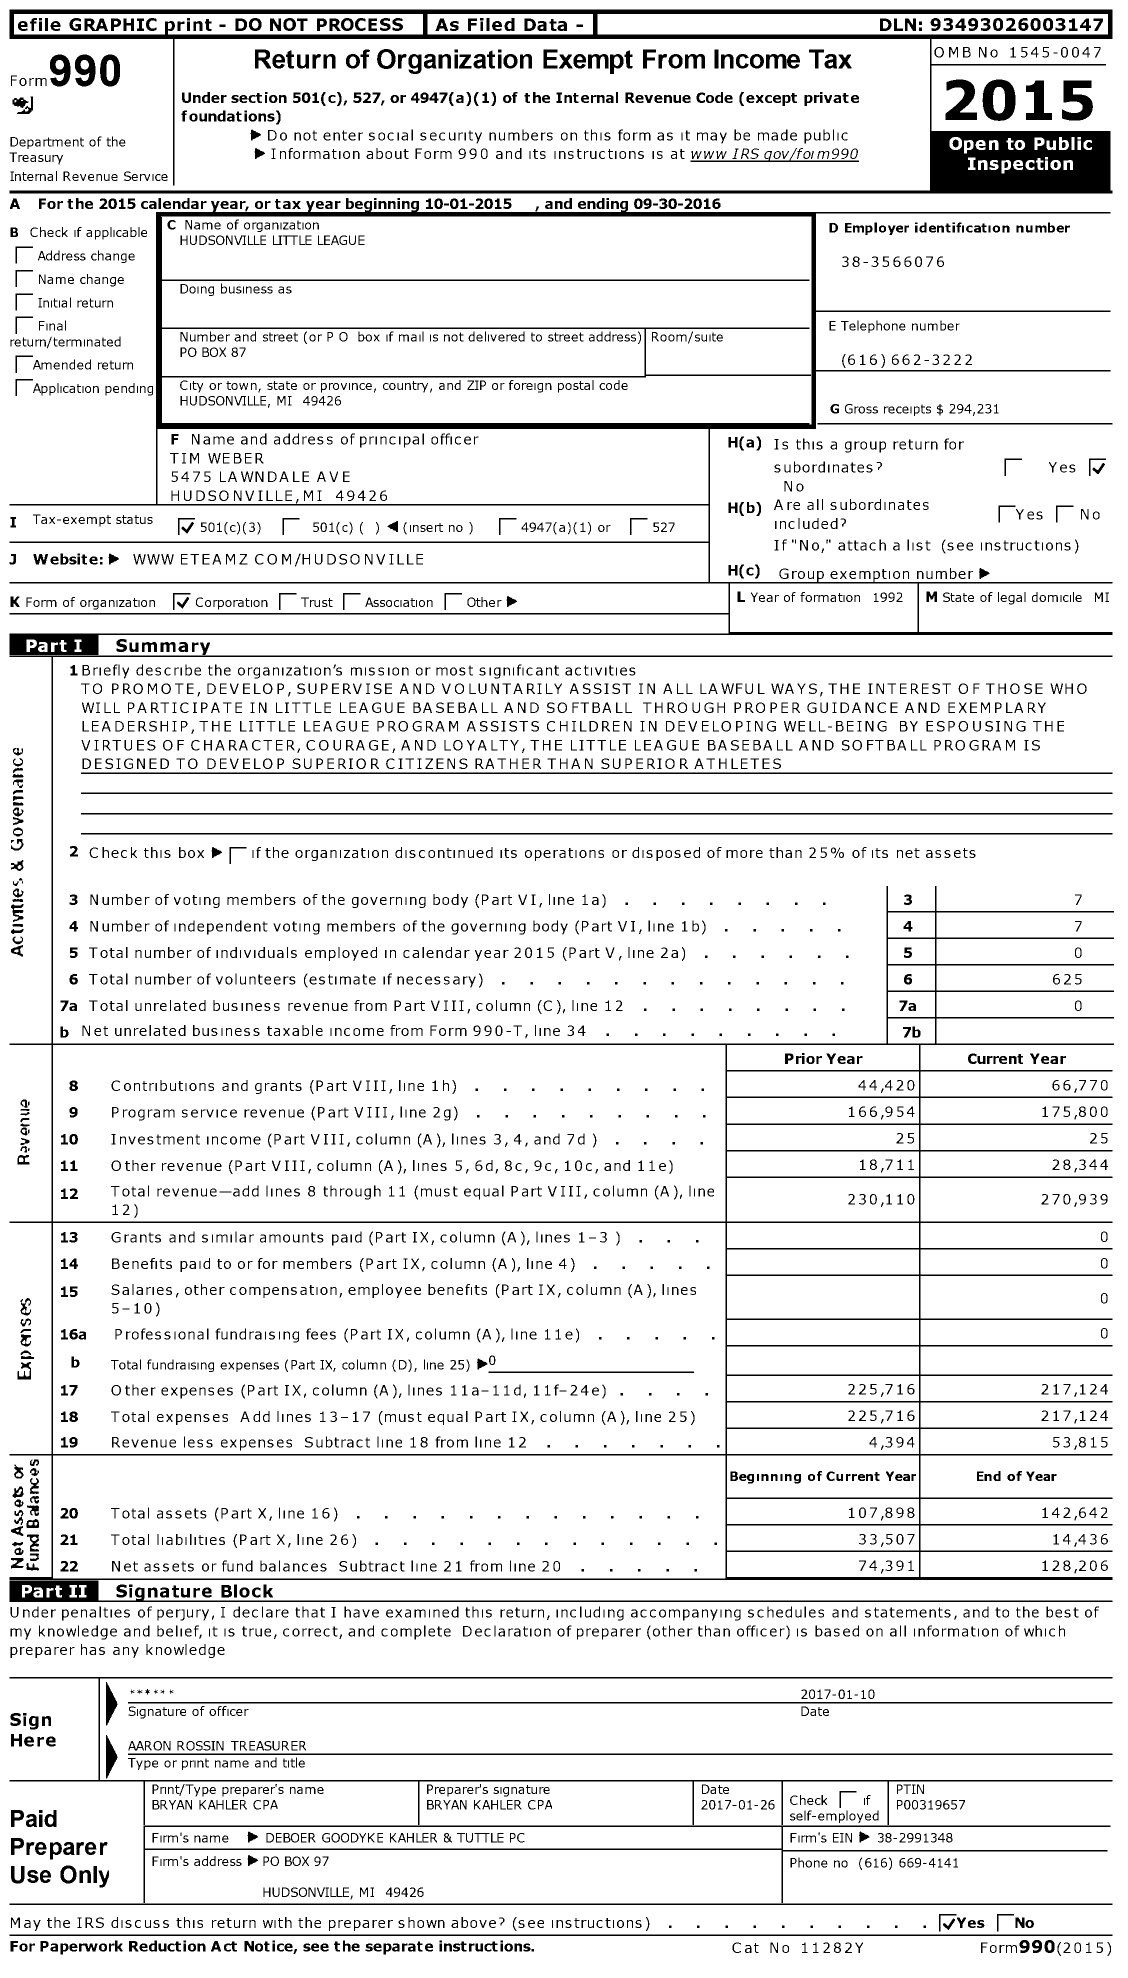 Image of first page of 2015 Form 990 for Little League Baseball - 1220914 Hudsonville LL